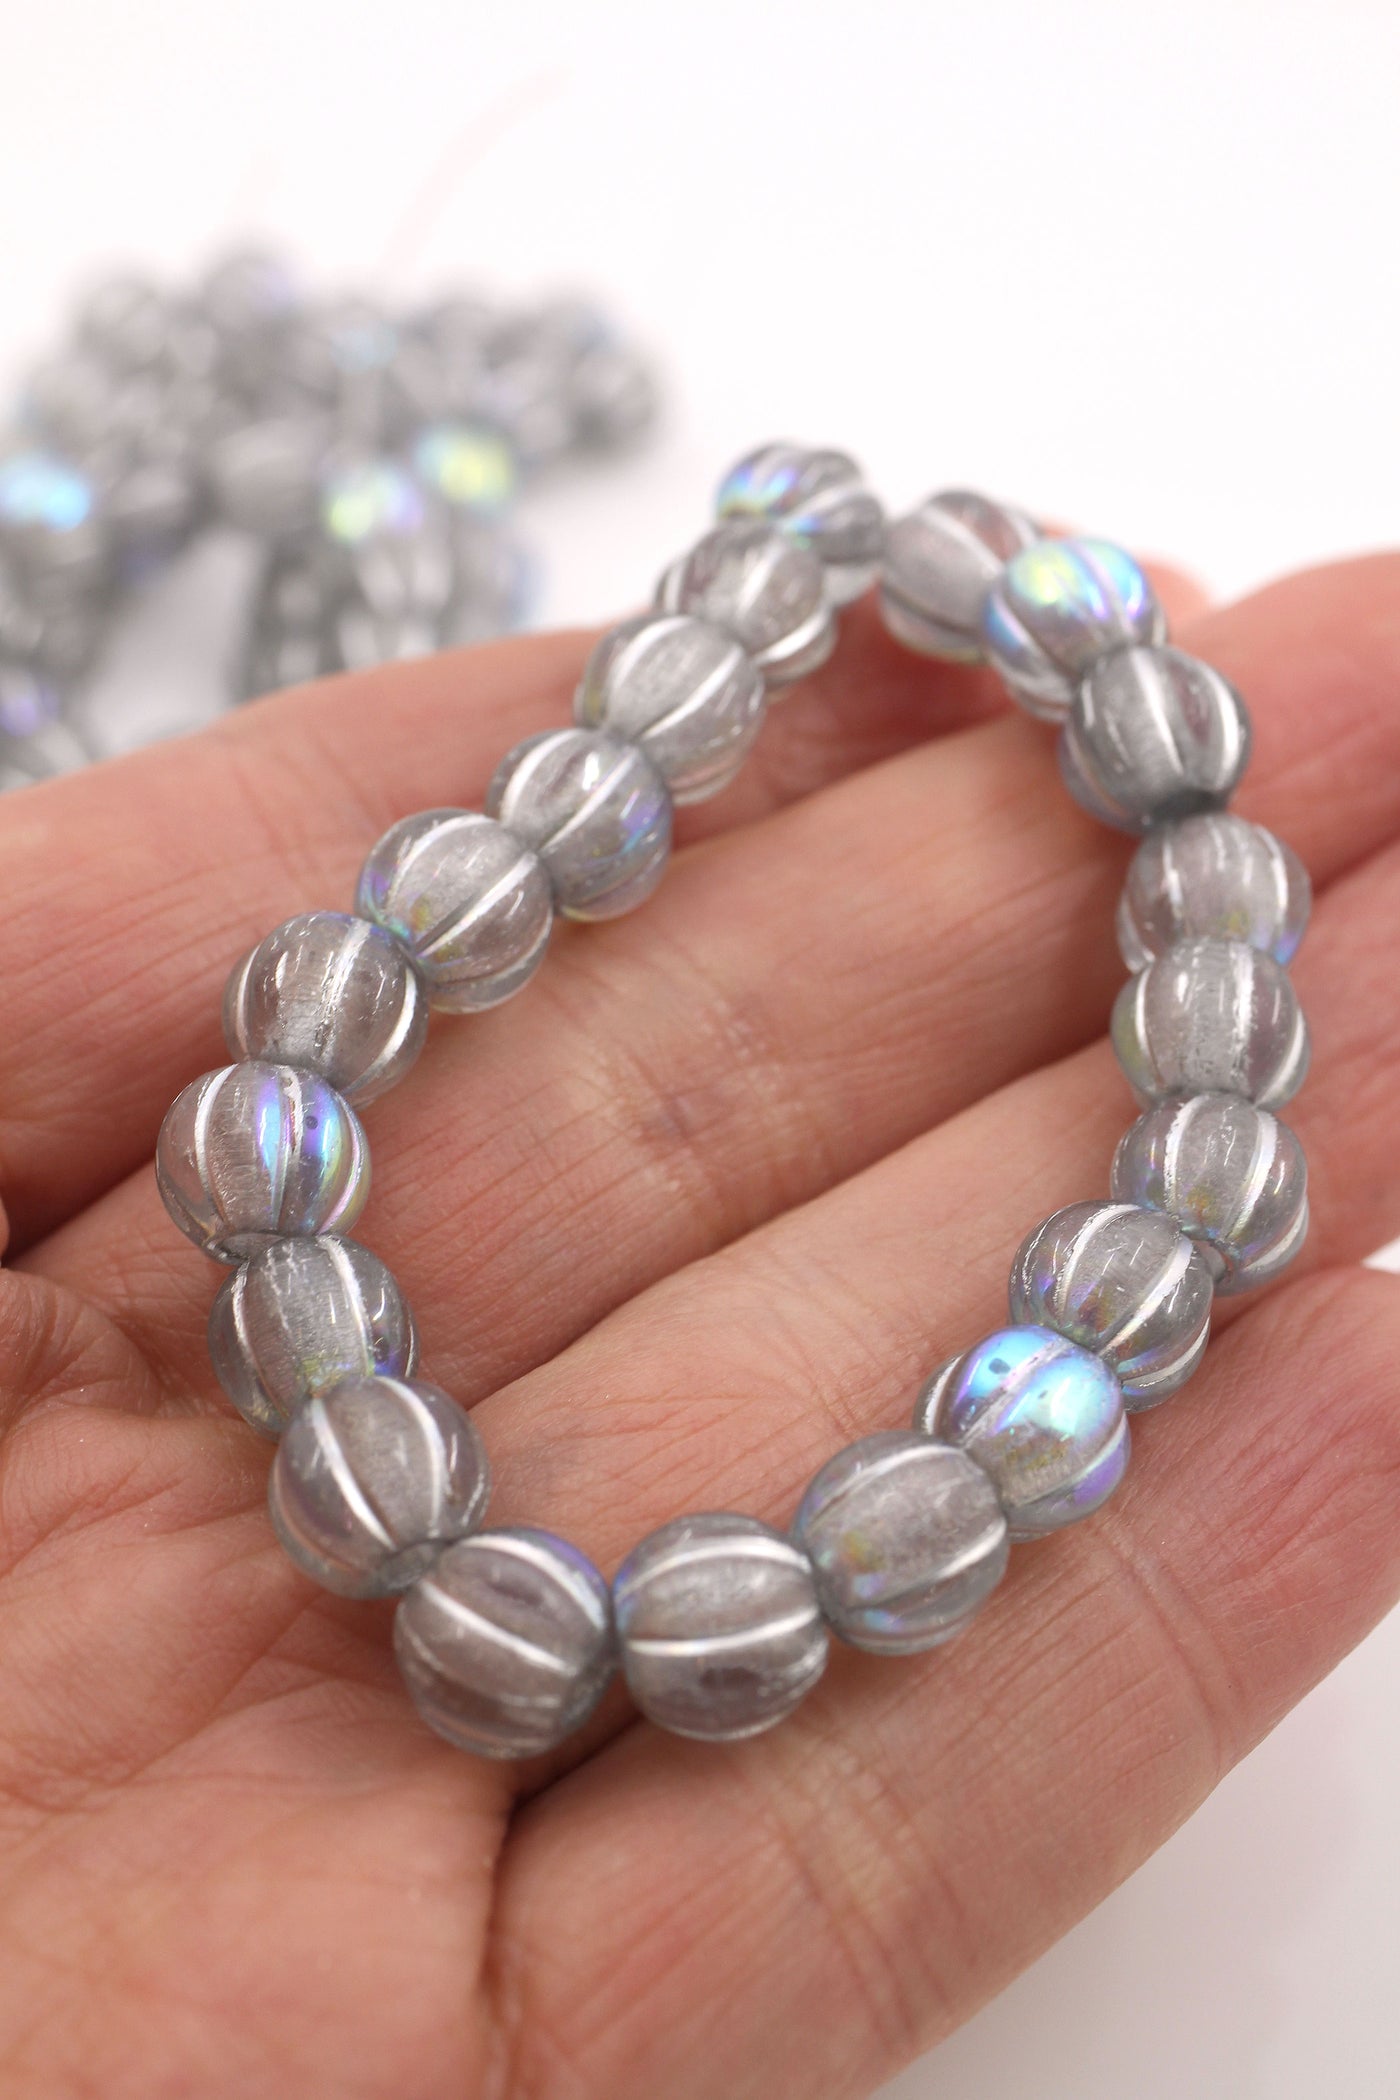 Silver Wash Rondelle Beads for DIY Tie On Bracelet or Necklace Kit, Easy DIY Jewelry